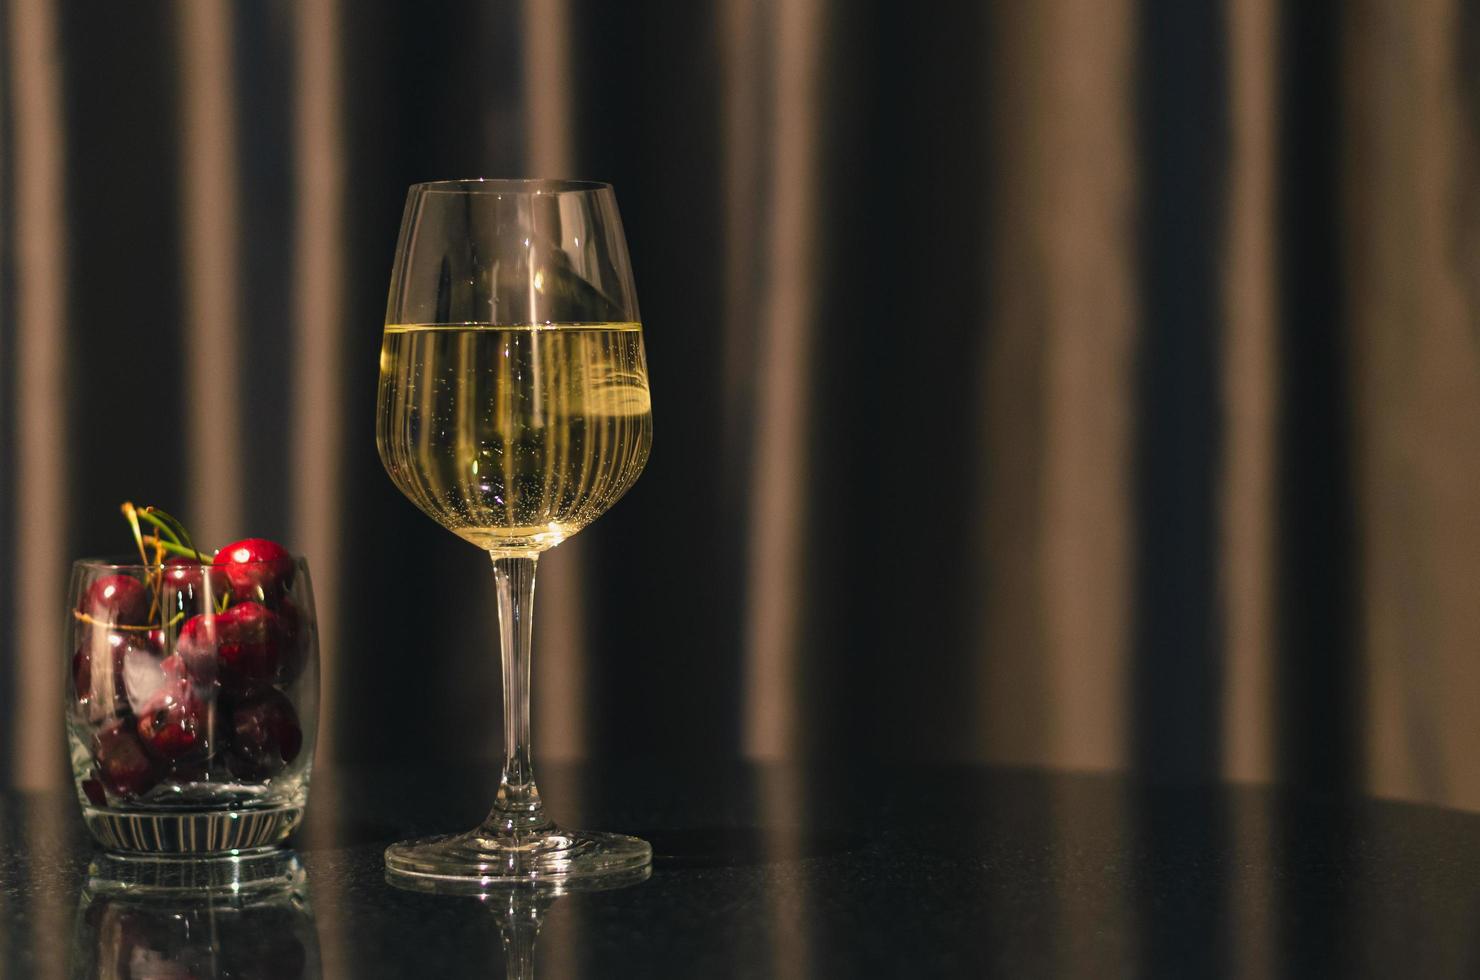 A glass of white wine with cherry fruits put on table in the room with curtain background. photo